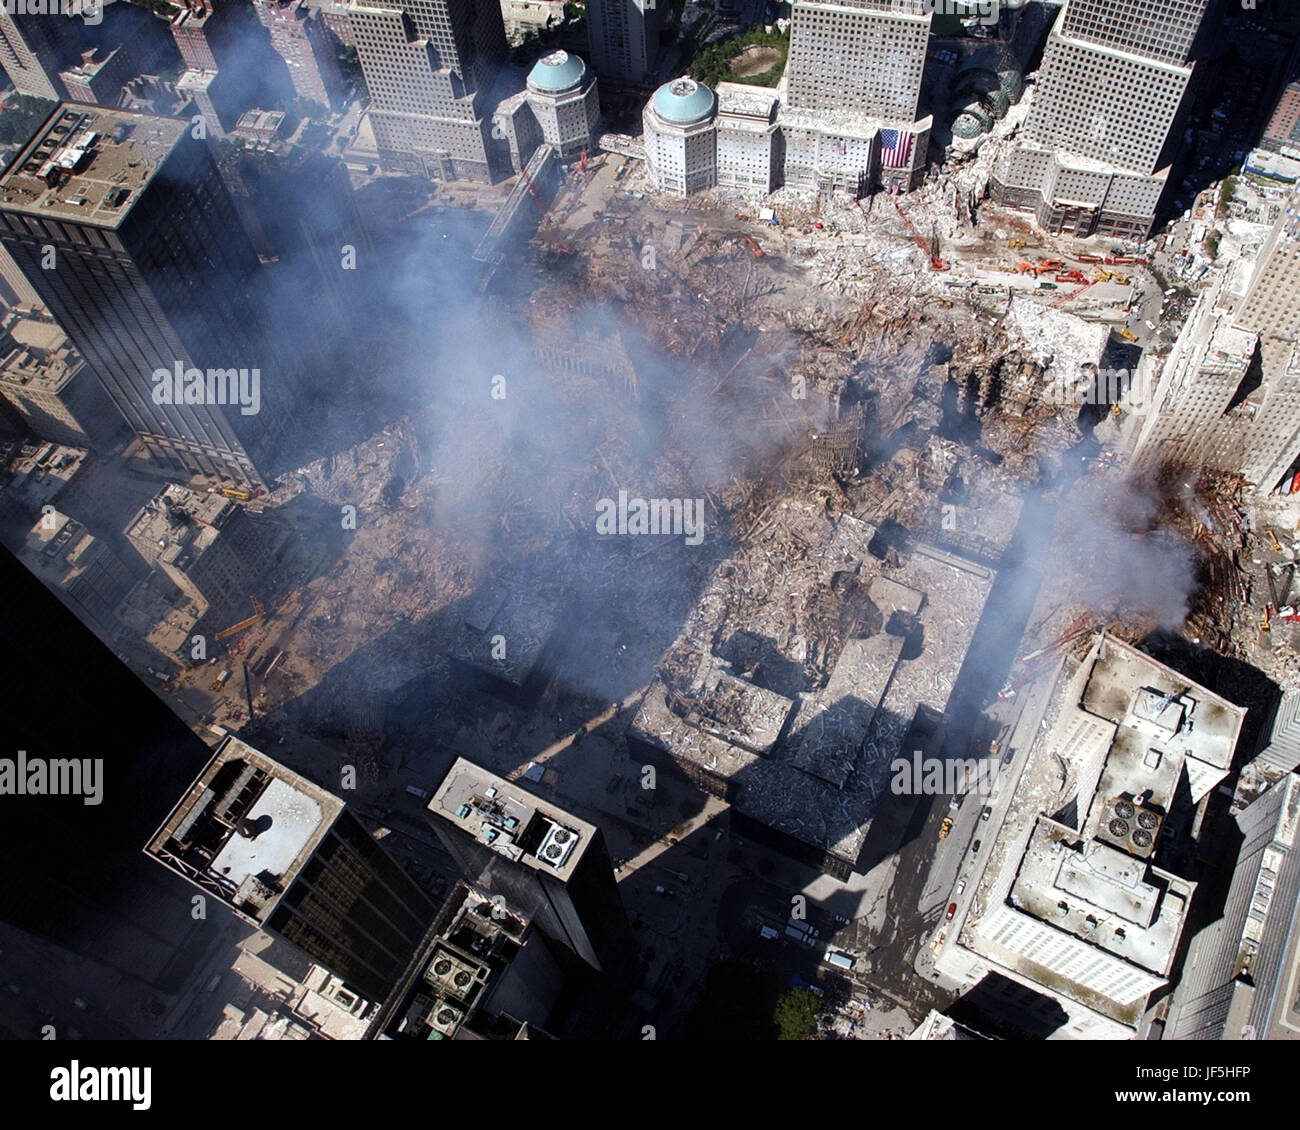 010917-N-7479T-514 Ground Zero, New York City, N.Y. (Sept. 17, 2001) -- An aerial view shows only a small portion of the crime scene where the World Trade Center collapsed following the Sept. 11 terrorist attack.  Surrounding buildings were heavily damaged by the debris and massive force of the falling twin towers.  Clean-up efforts are expected to continue for months.  U.S. Navy photo by Chief Photographer's Mate Eric J. Tilford. Stock Photo